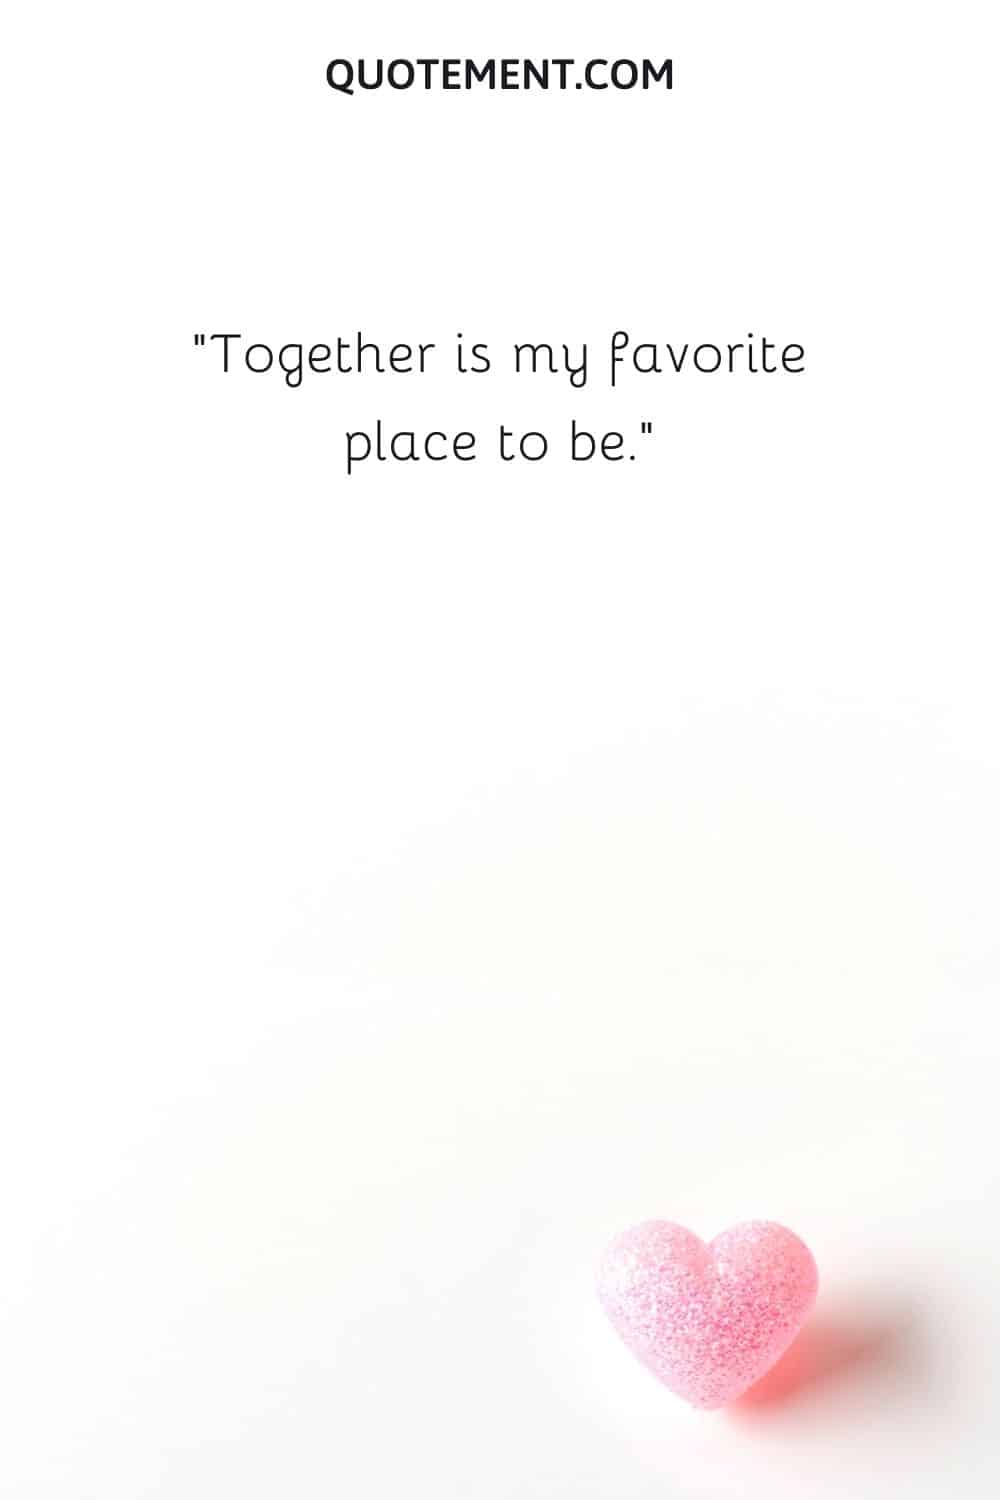 Together is my favorite place to be.